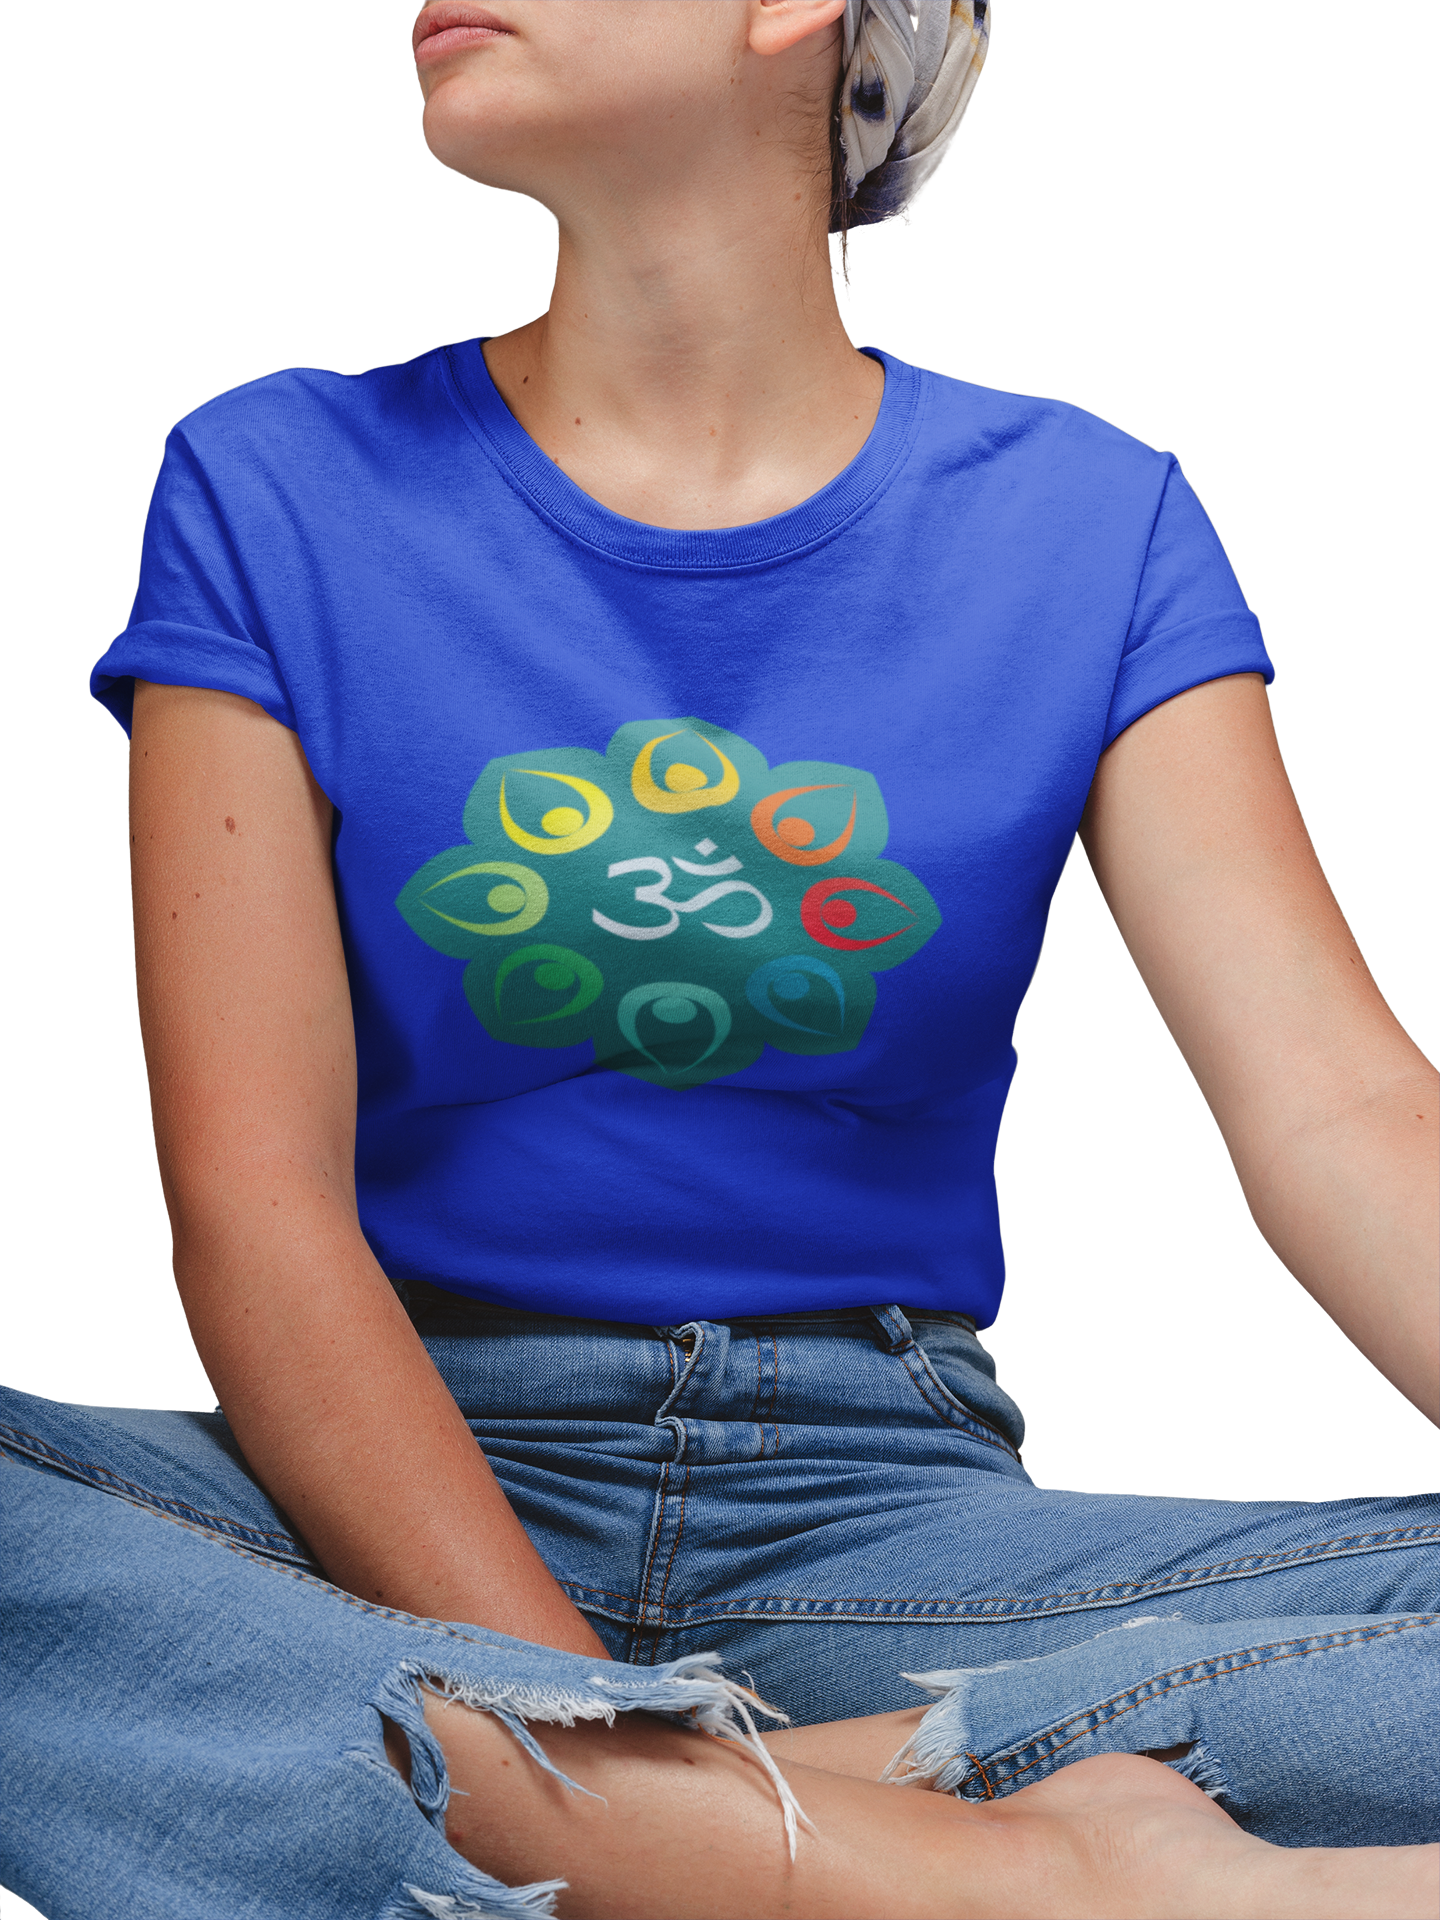 Royal Blue T-shirt for women printed with Om graphic design